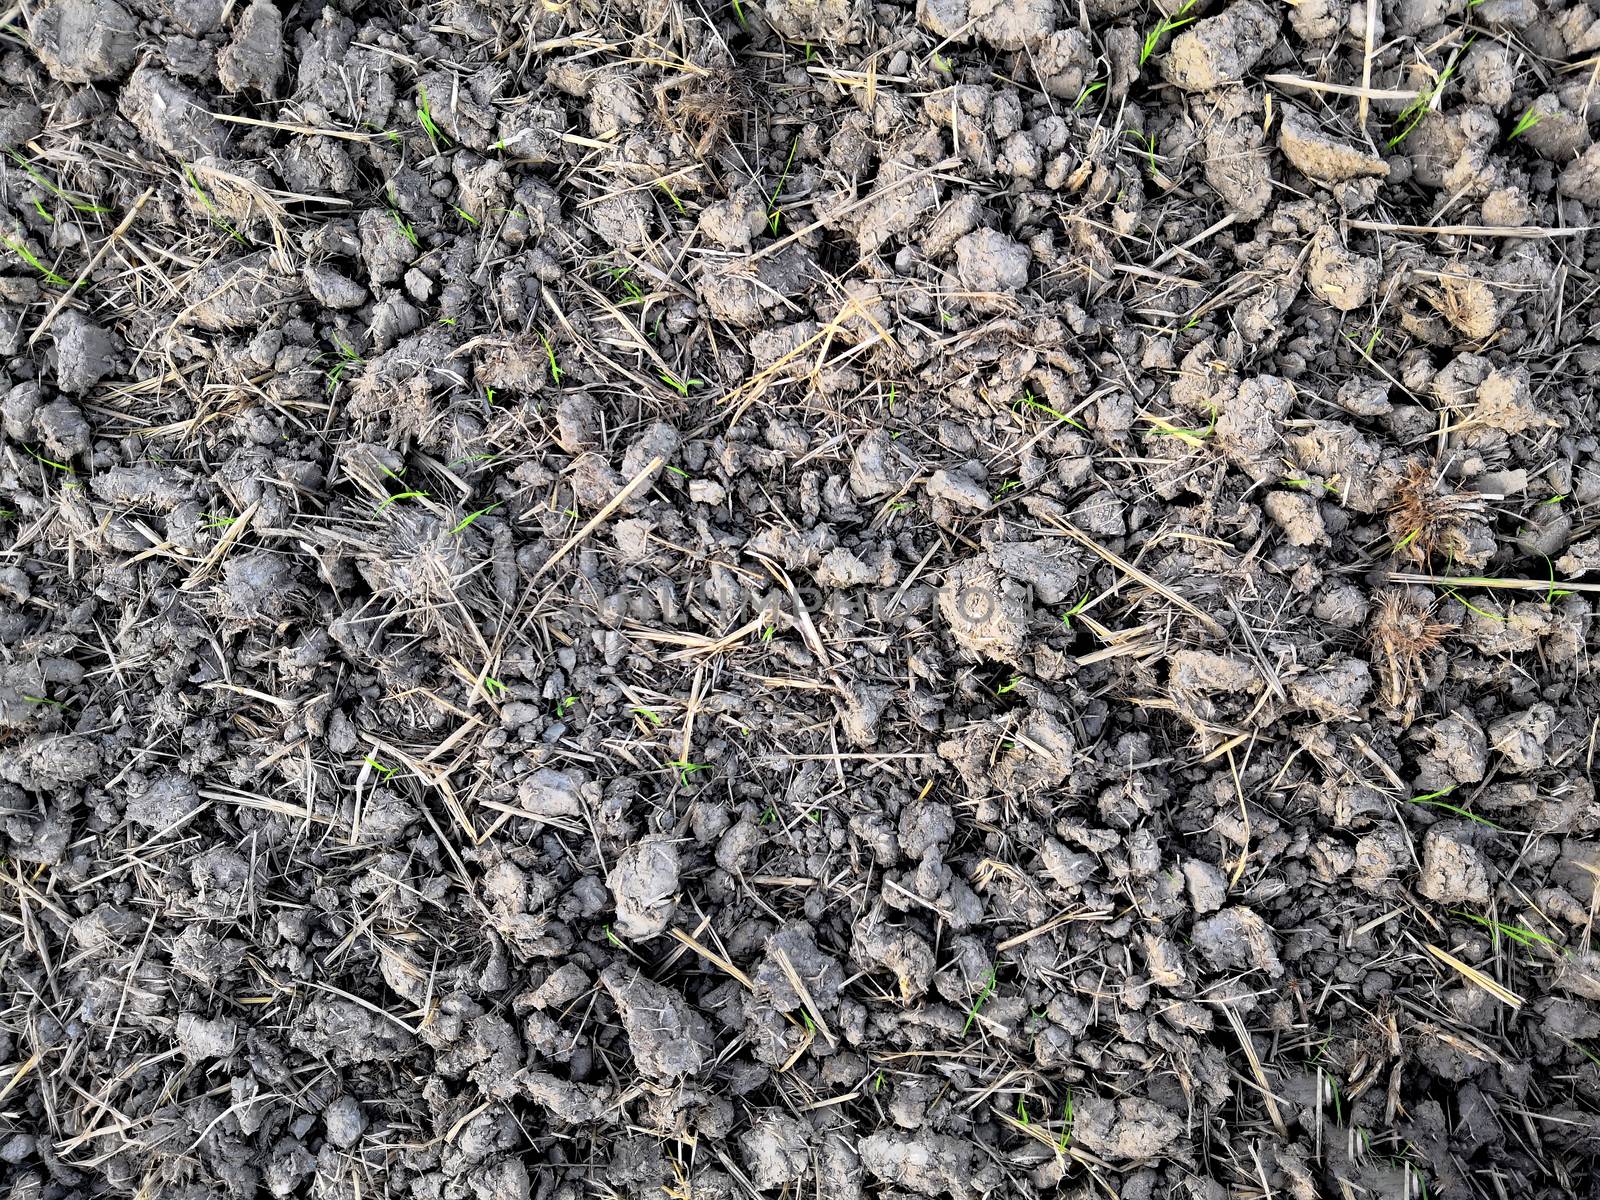 Soil surface in the field after harvest